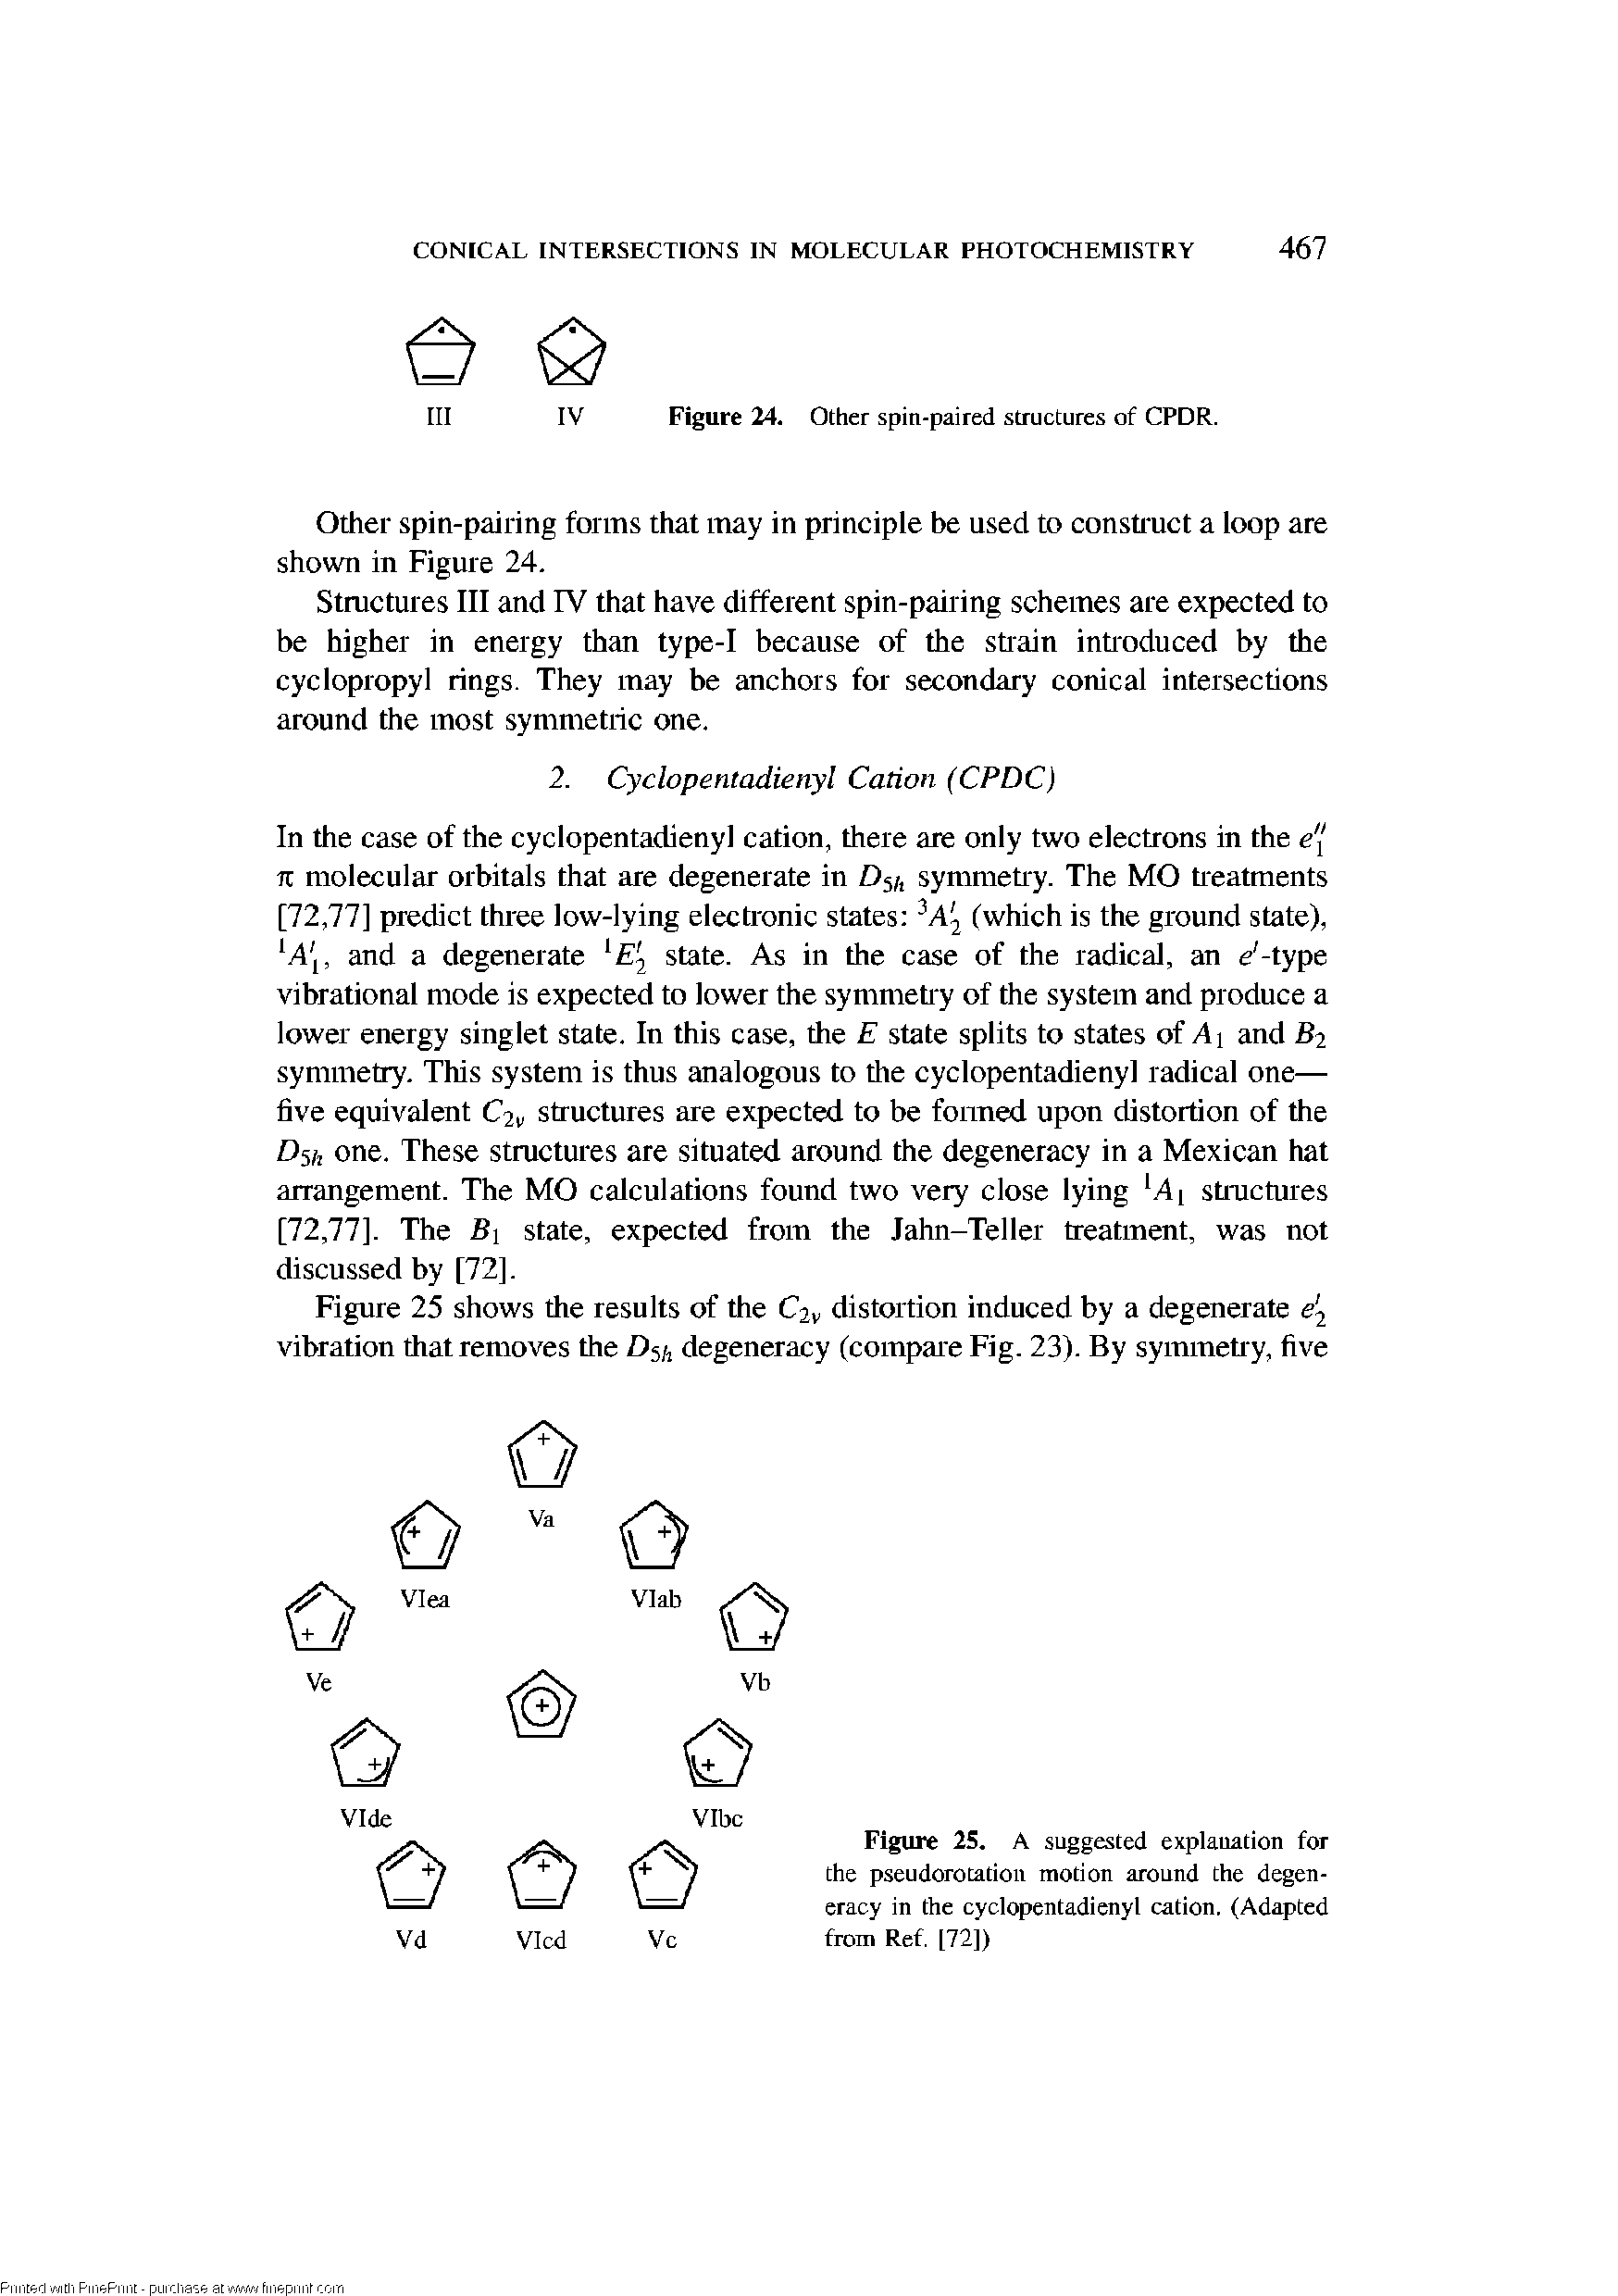 Figure 25. A suggested explanation for the pseudorotatioii motion around the degeneracy in the cyclopentadienyl cation. (Adapted from Ref. [72])...